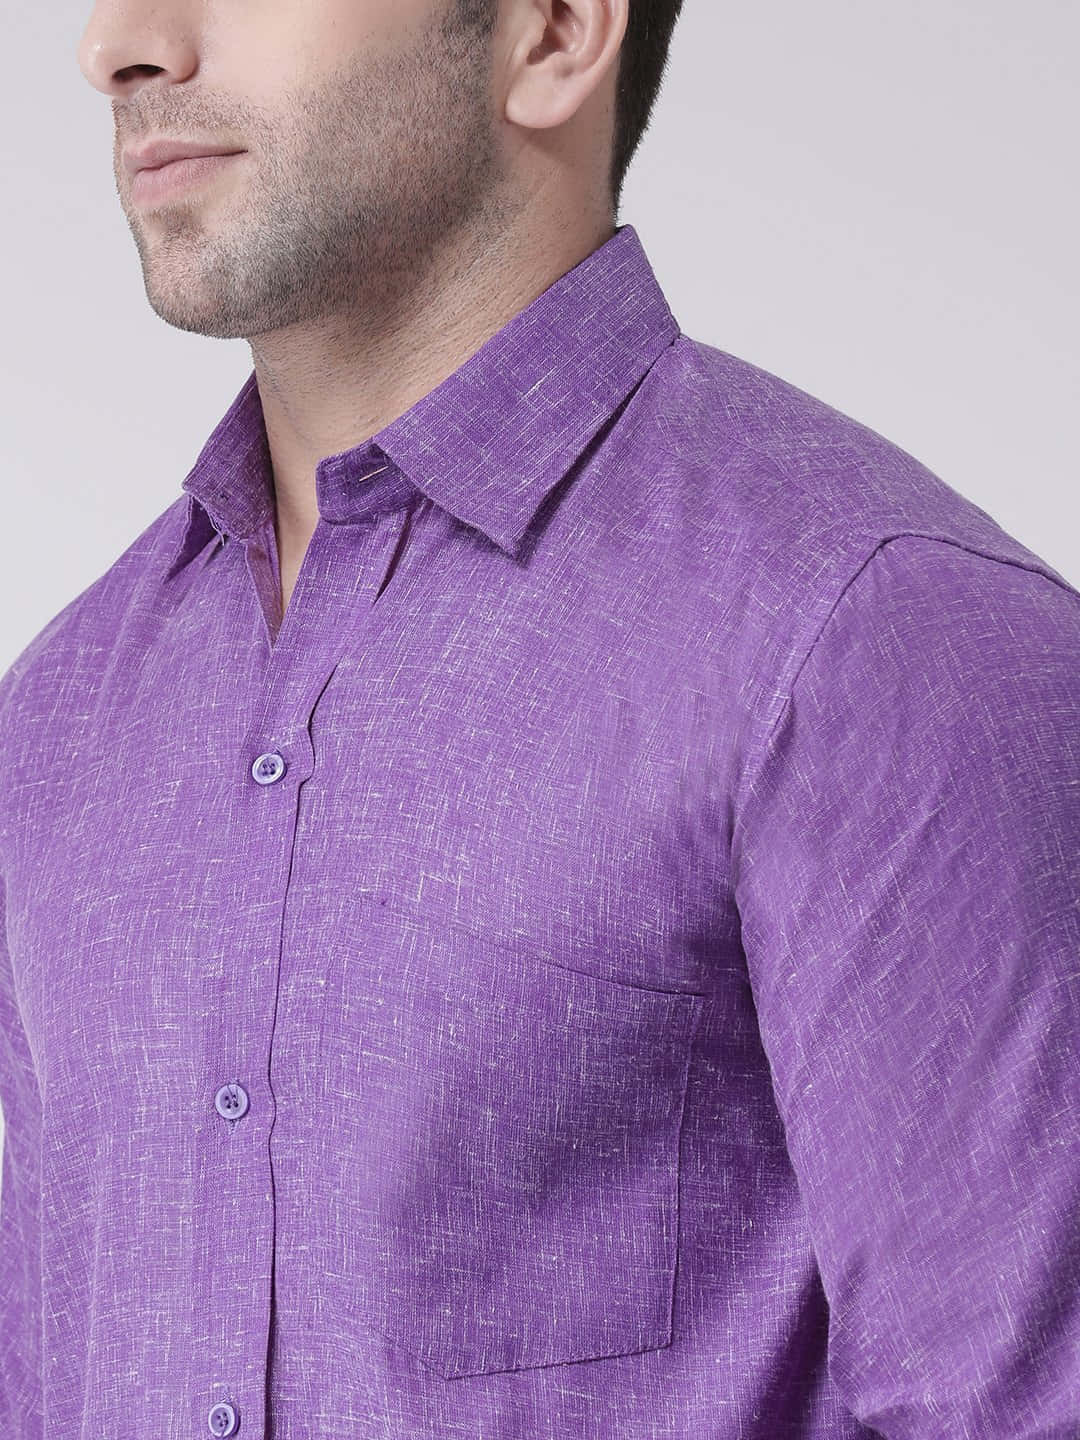 "Pretty in Purple! Stand Out in This Stylish Shirt" Wallpaper